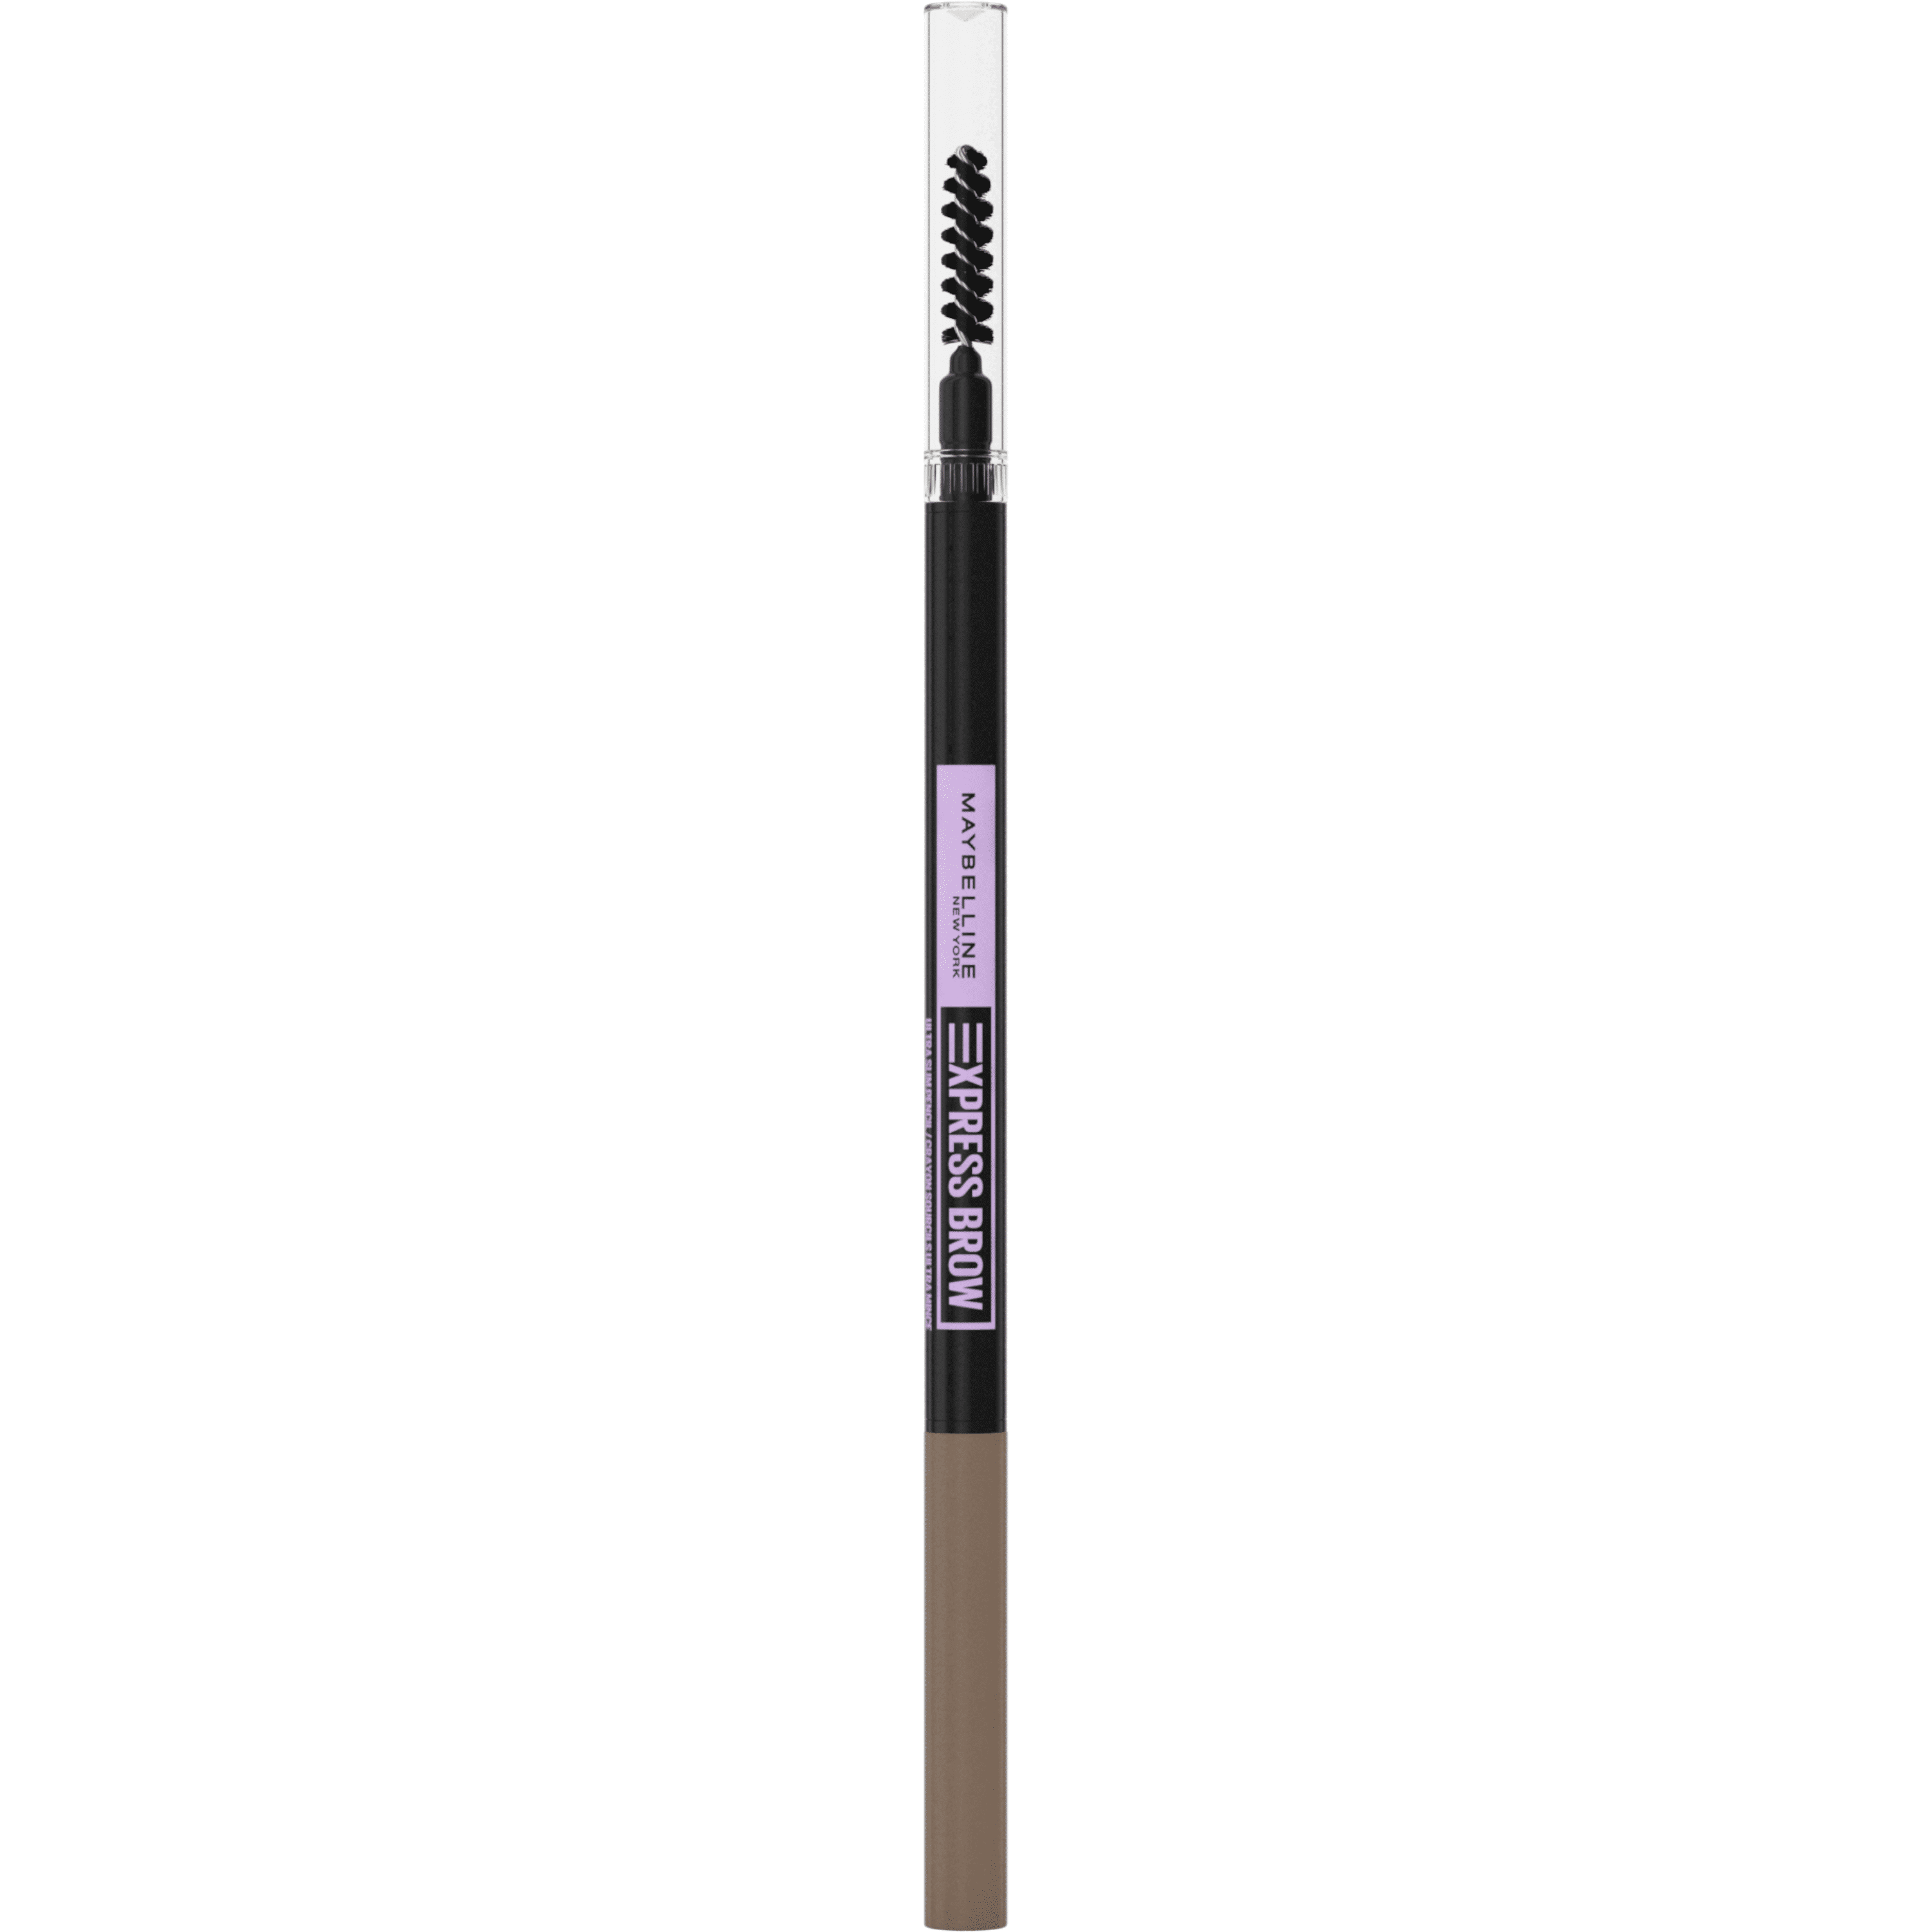 Maybelline Express Brow Ultra Slim Pencil Eyebrow Makeup, Soft Brown